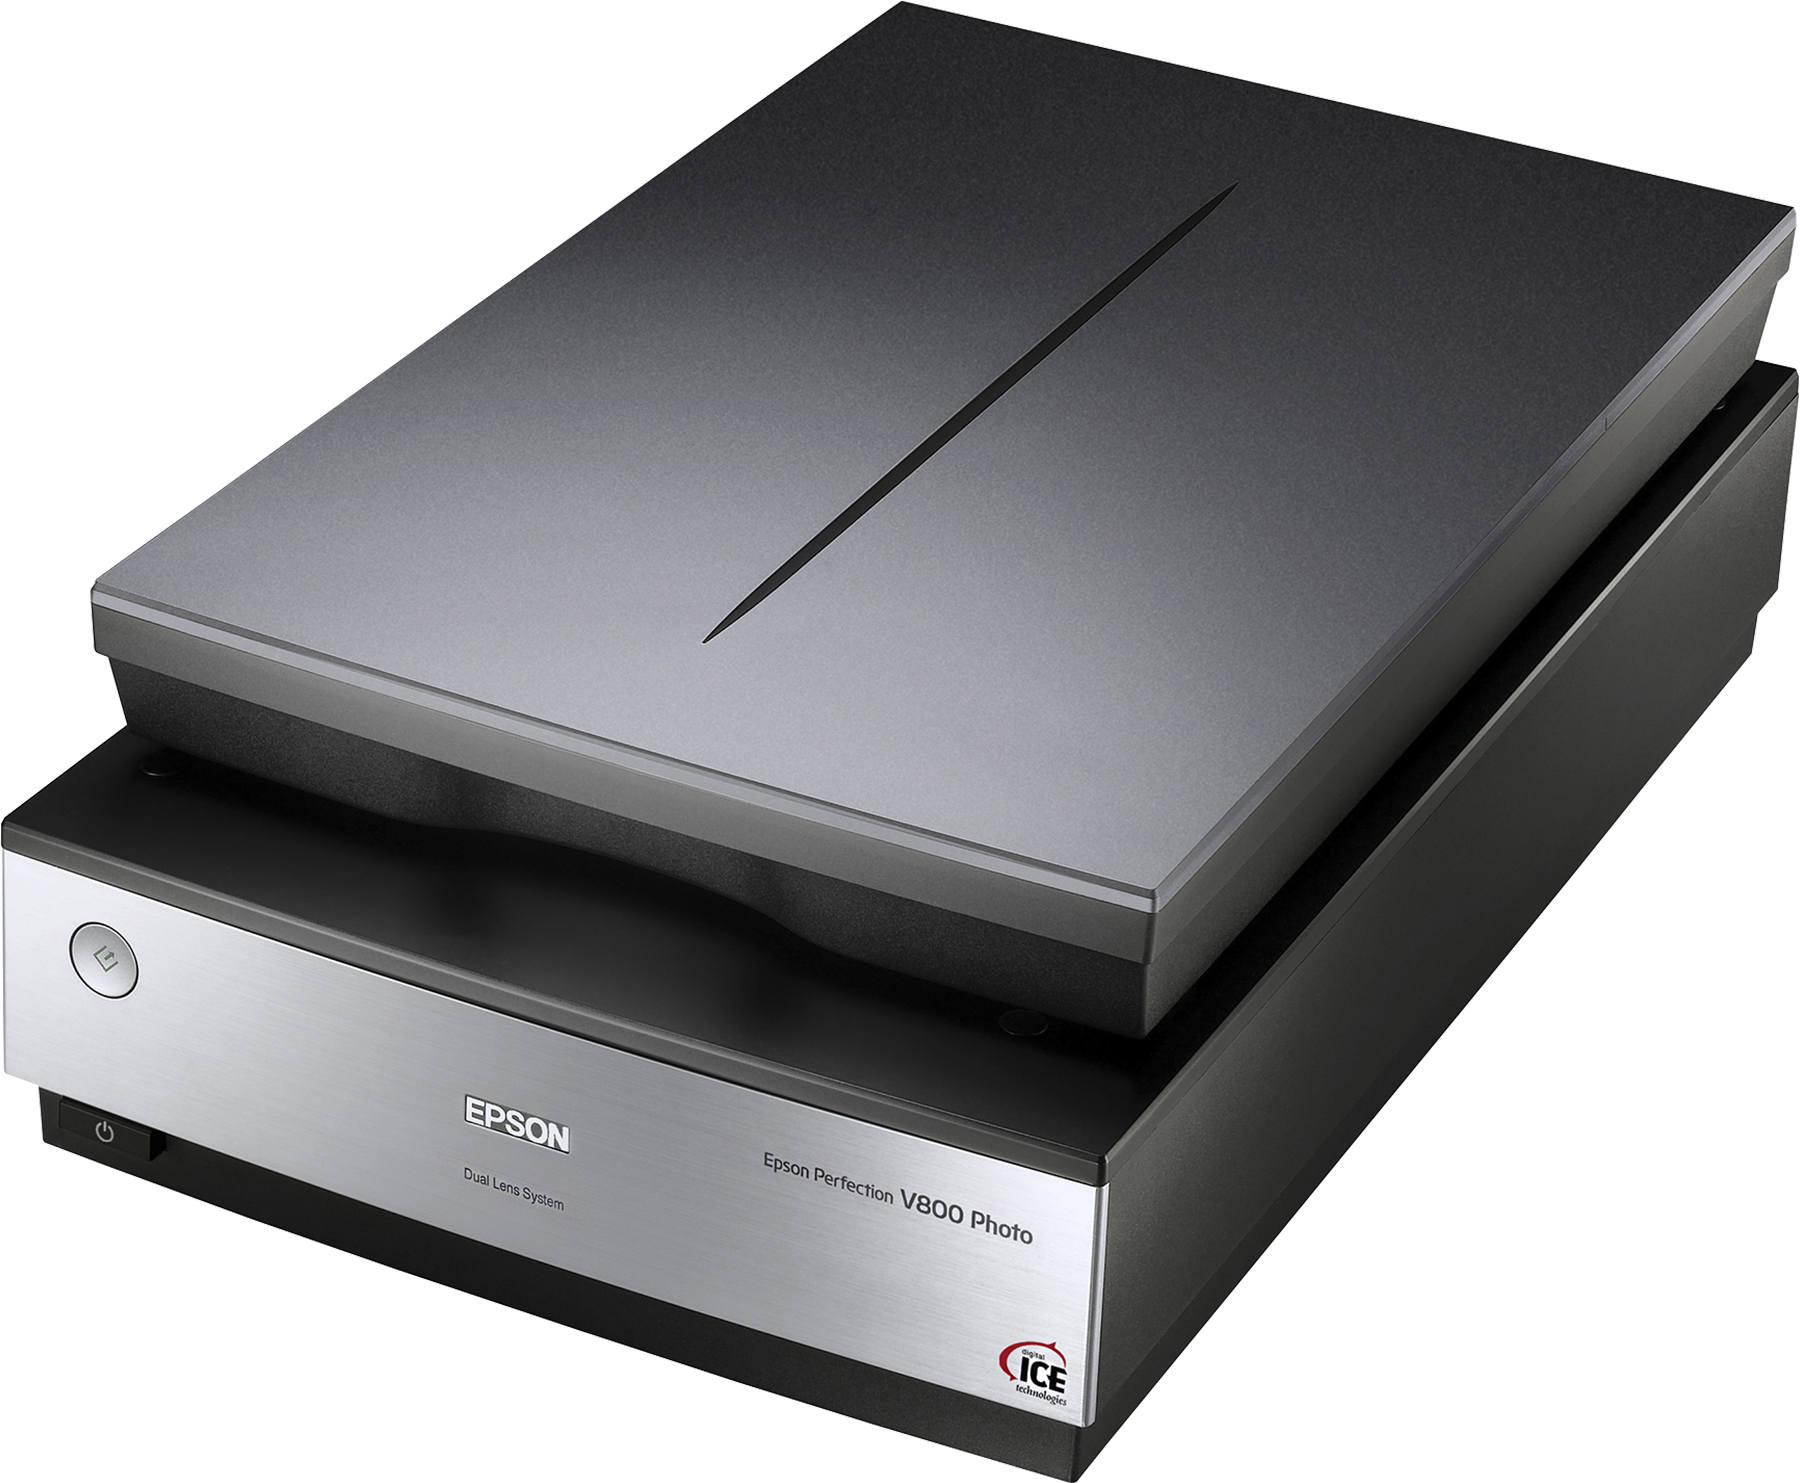 Epson Perfection V800 Photo Scanner, computers flatbed scanners, Epson - Pictureline  - 2